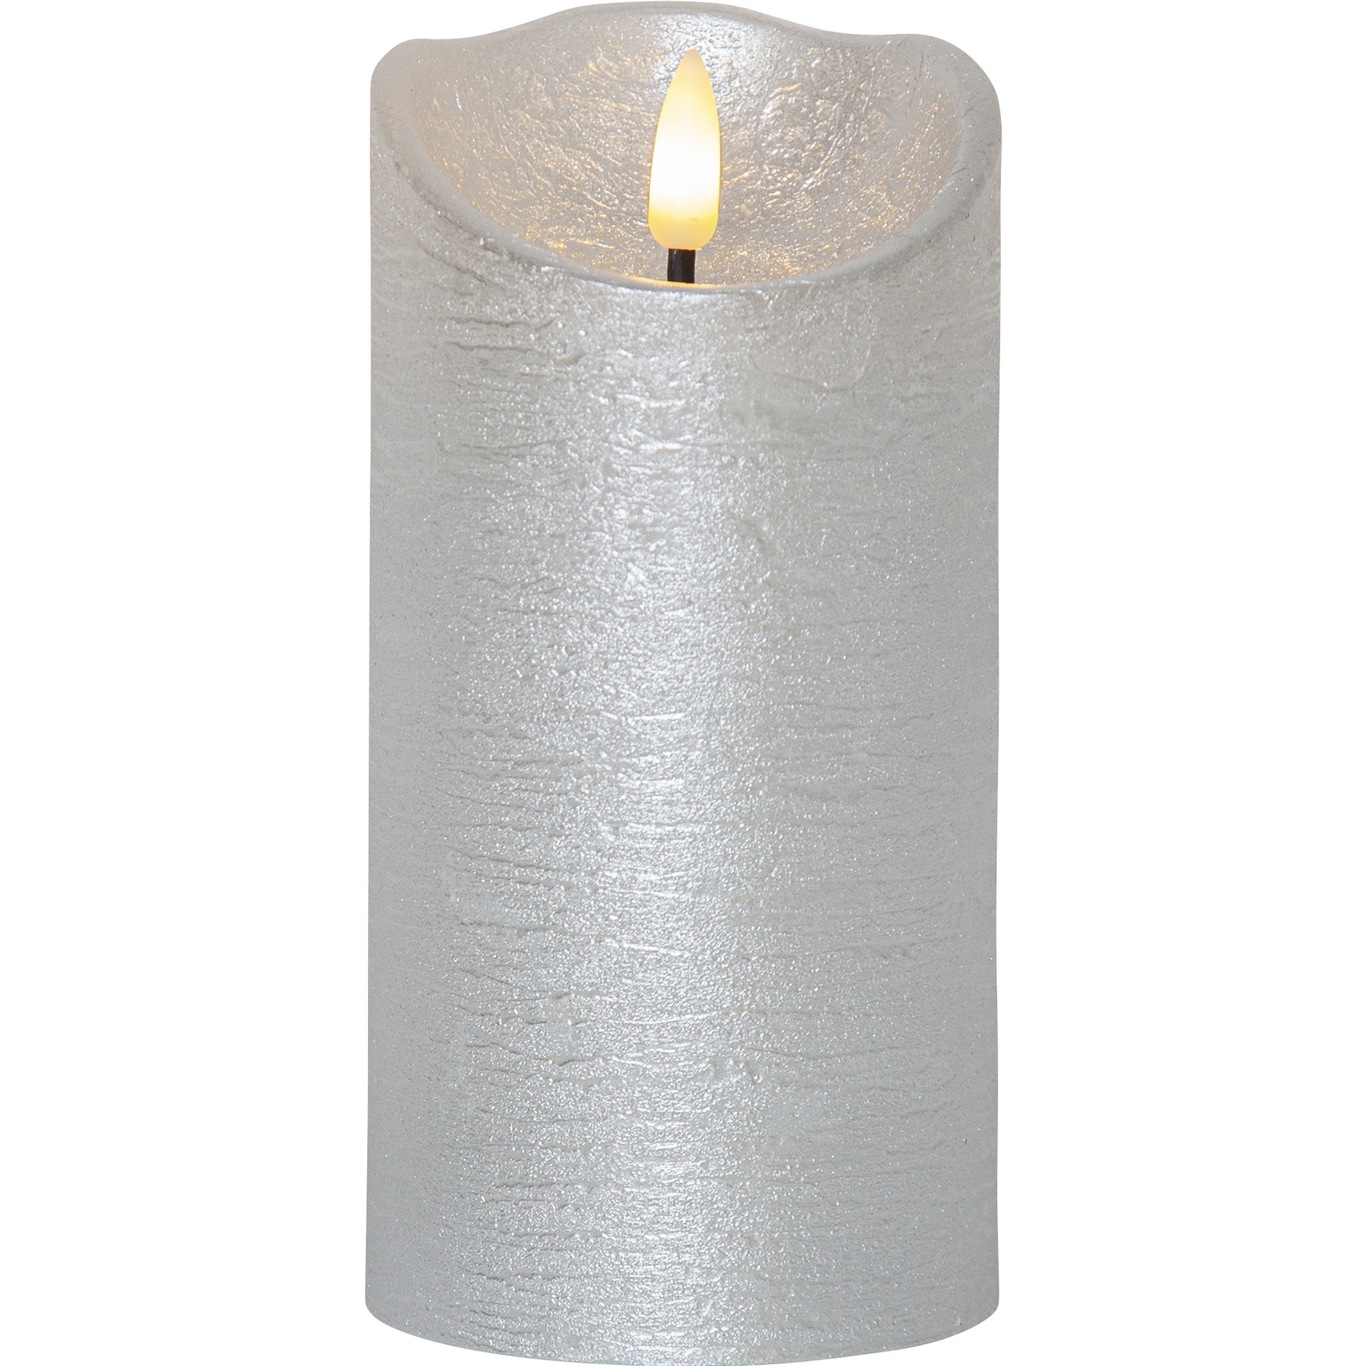 Flamme Rustic LED Kubbelys Silver, 15 cm